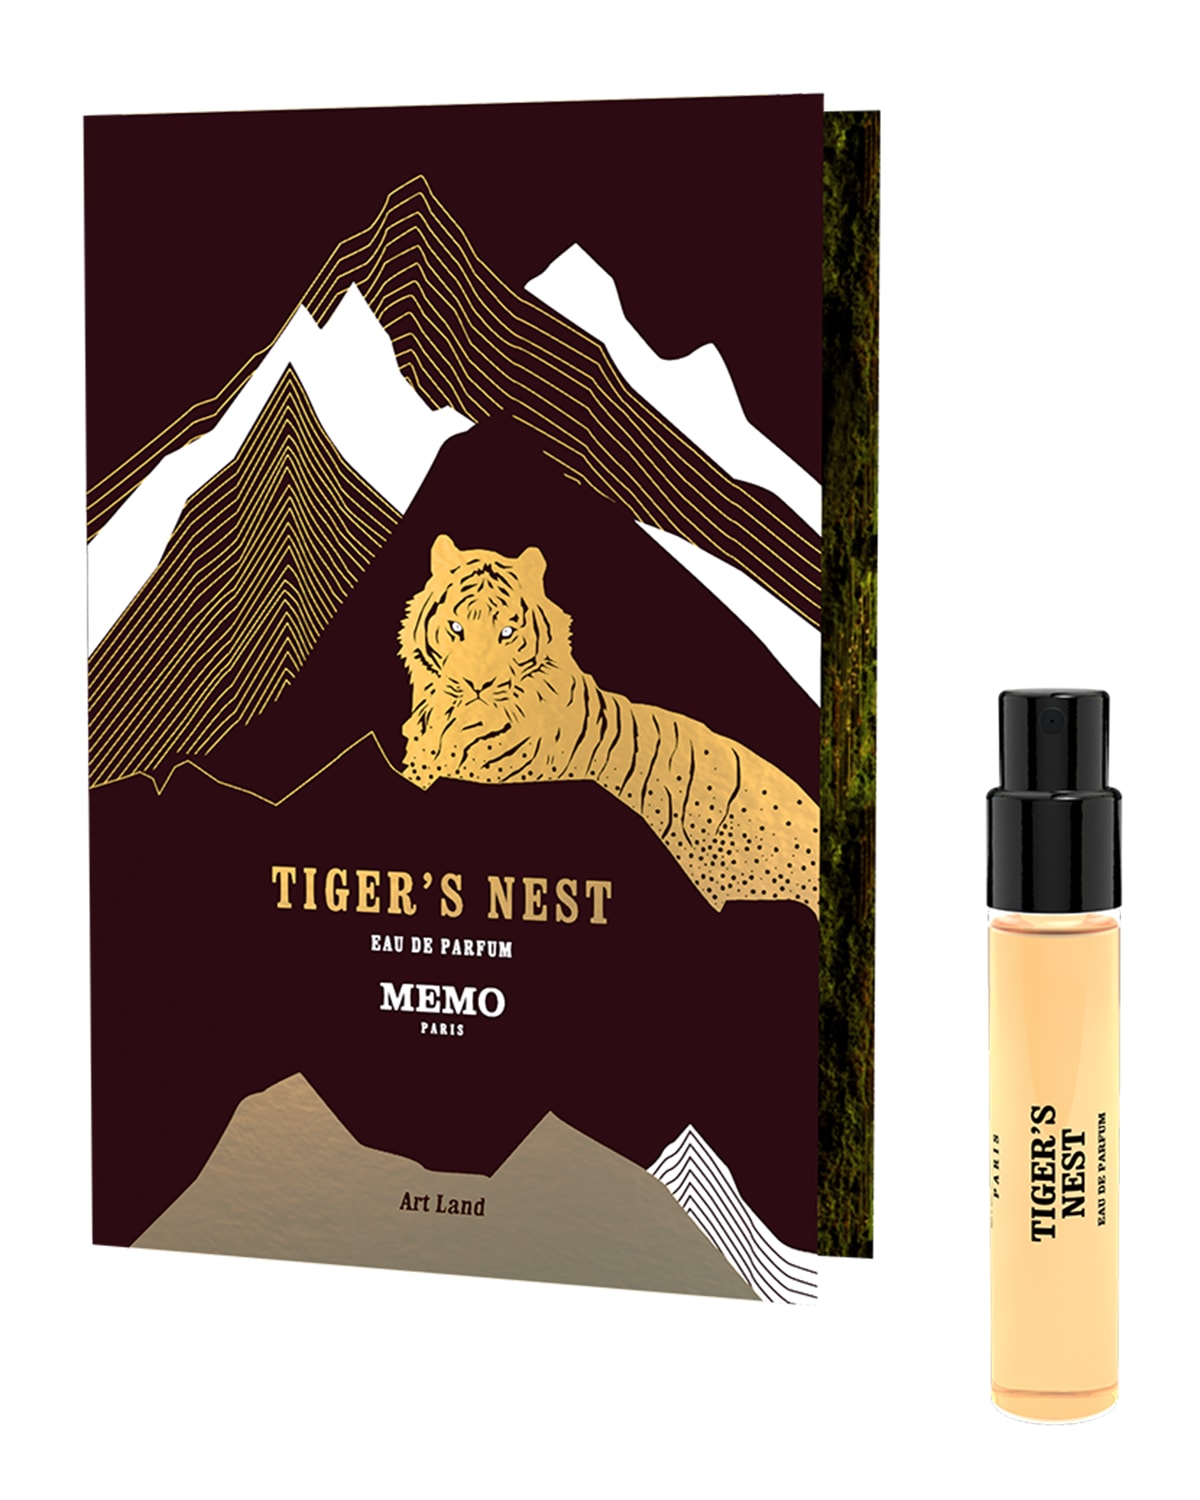 Receive a Tiger's Nest sample, with any beauty purchase.